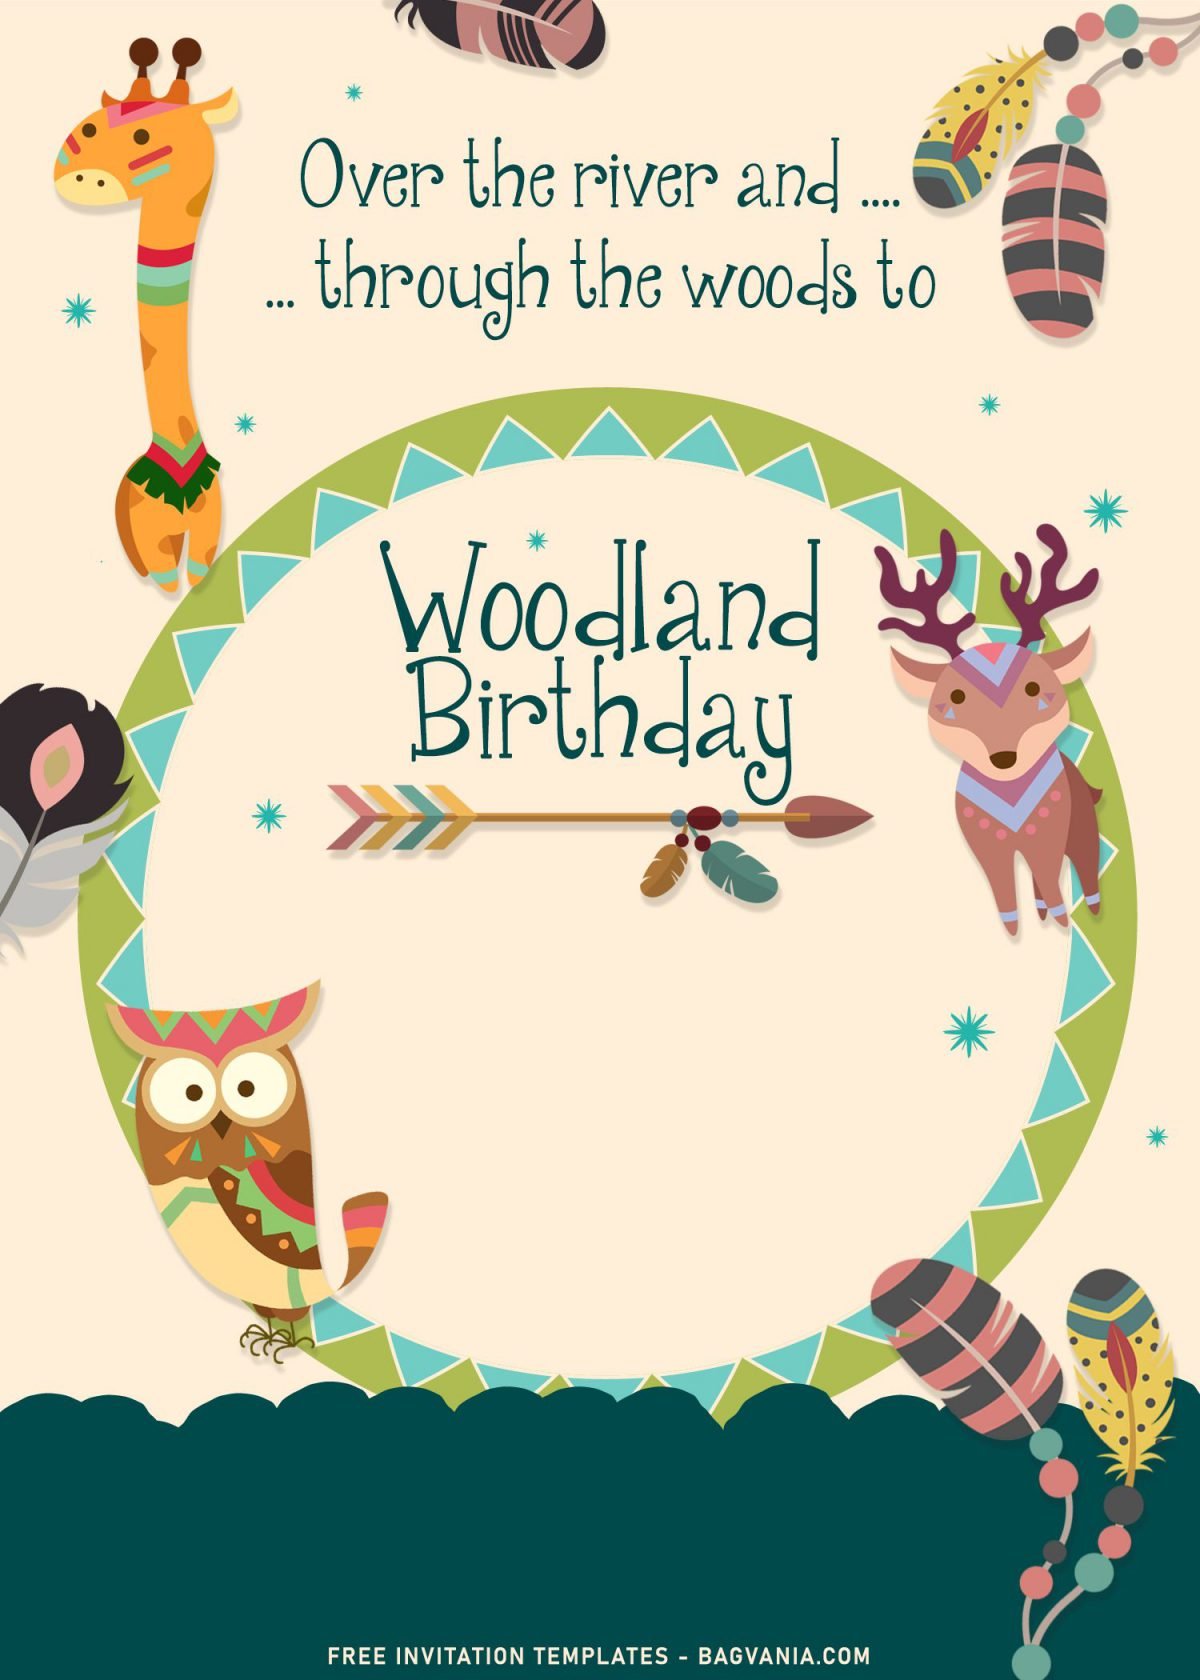 7+ Woodland Birthday Invitation Templates For Your Little Animal Lover Birthday and has portrait design